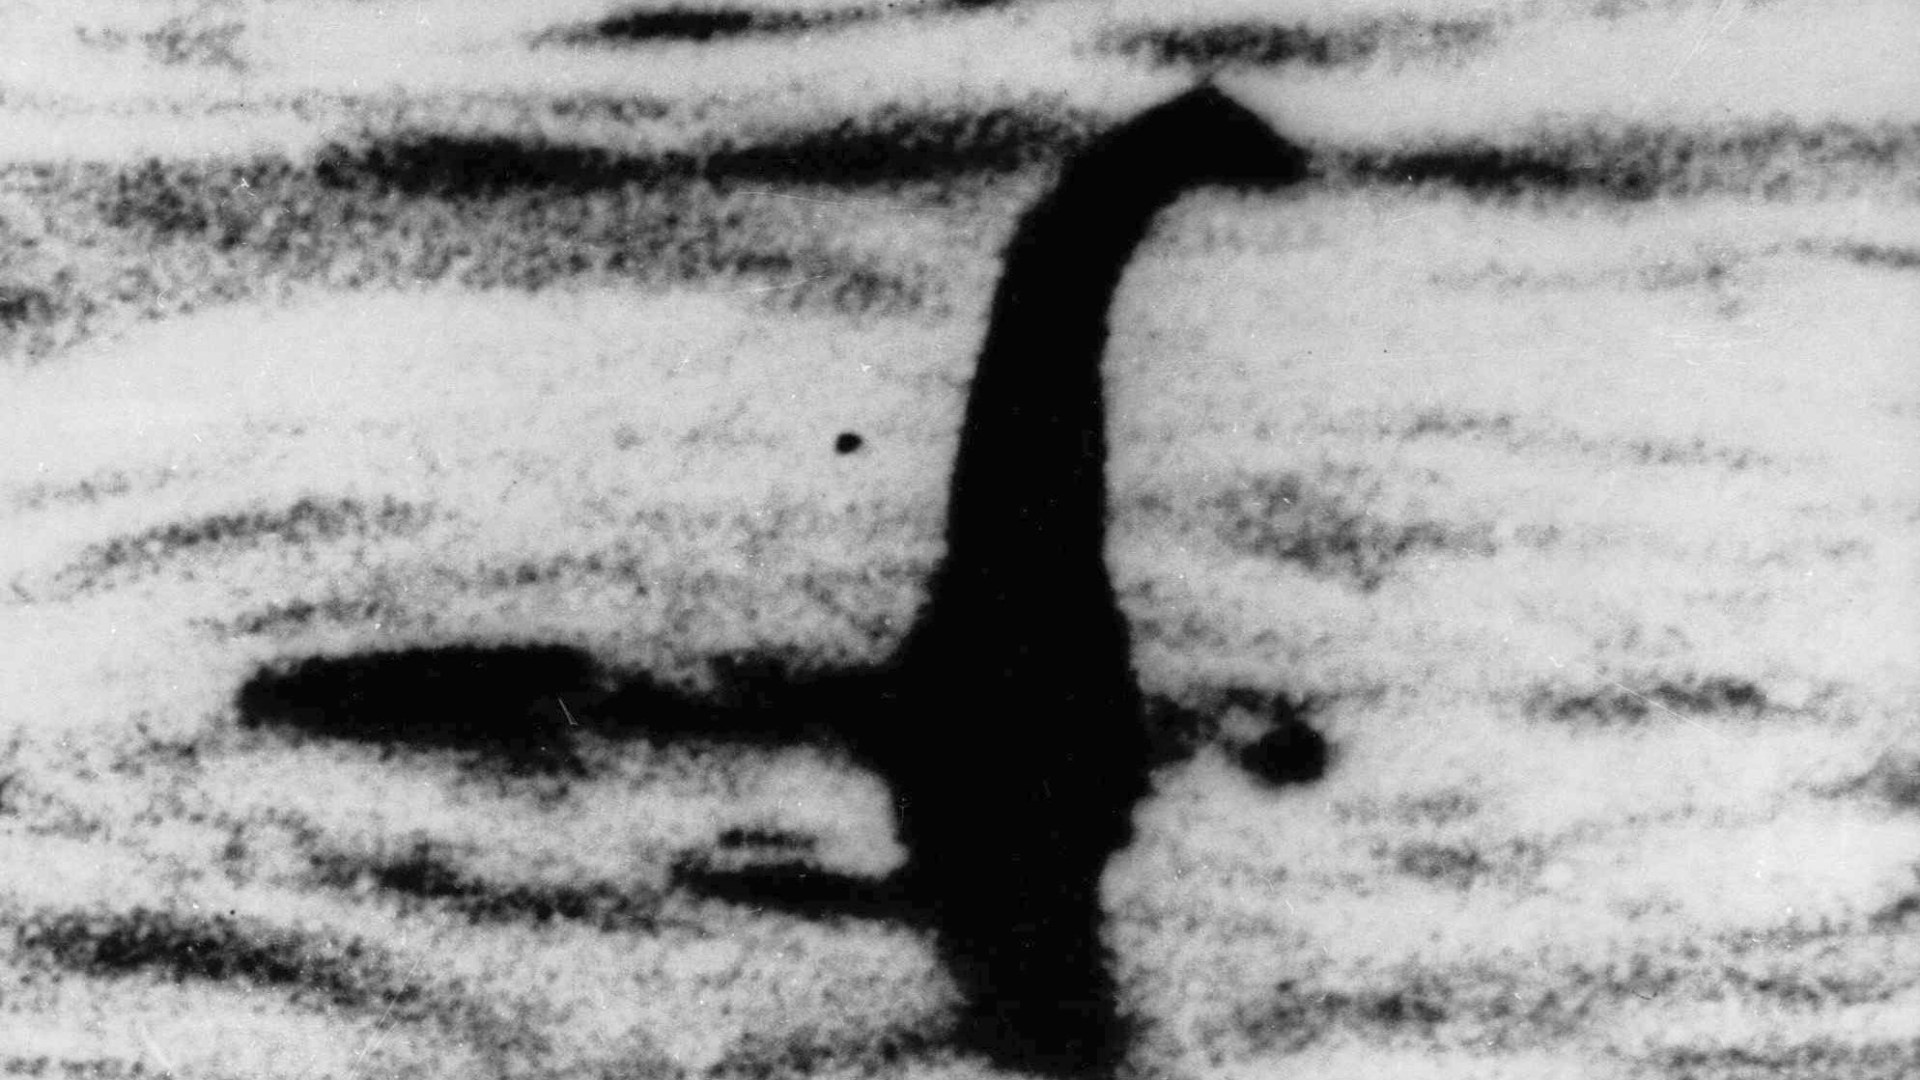 Shocking Revelation: Loch Ness Monster Exposed as Male in New Book Leaves Fans Baffled and Horrified